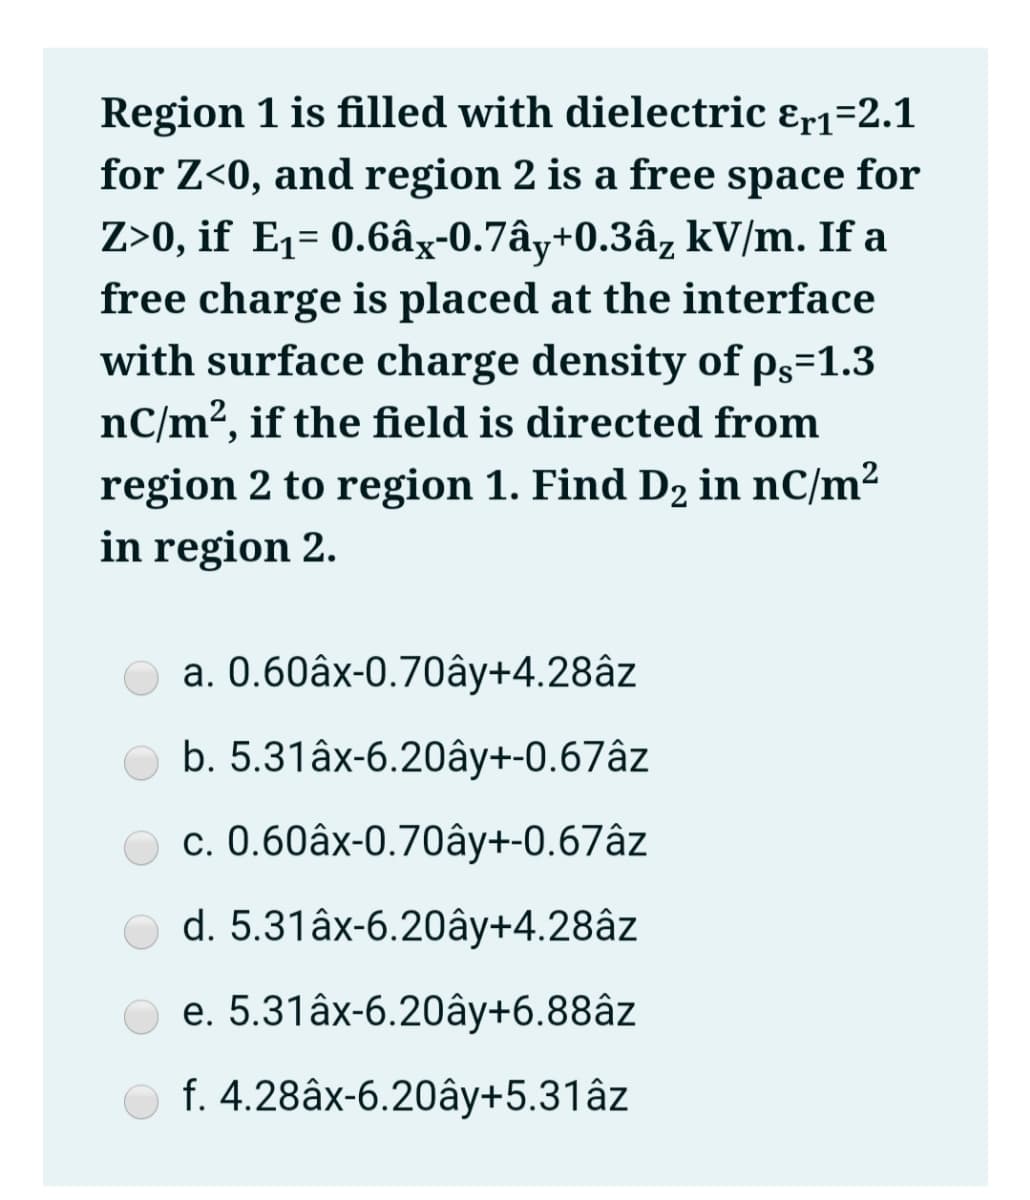 Region 1 is filled with dielectric &r1=2.1
for Z<0, and region 2 is a free space for
Z>0, if E1= 0.6âx-0.7ây+0.3âz kV/m. If a
free charge is placed at the interface
with surface charge density of ps=1.3
nC/m², if the field is directed from
region 2 to region 1. Find D2 in nC/m²
in region 2.
a. 0.60âx-0.70ây+4.28âz
b. 5.31âx-6.20ây+-0.67âz
c. 0.60âx-0.70ây+-0.67âz
d. 5.31âx-6.20ây+4.28âz
e. 5.31âx-6.20ây+6.88âz
f. 4.28âx-6.20ây+5.31âz
